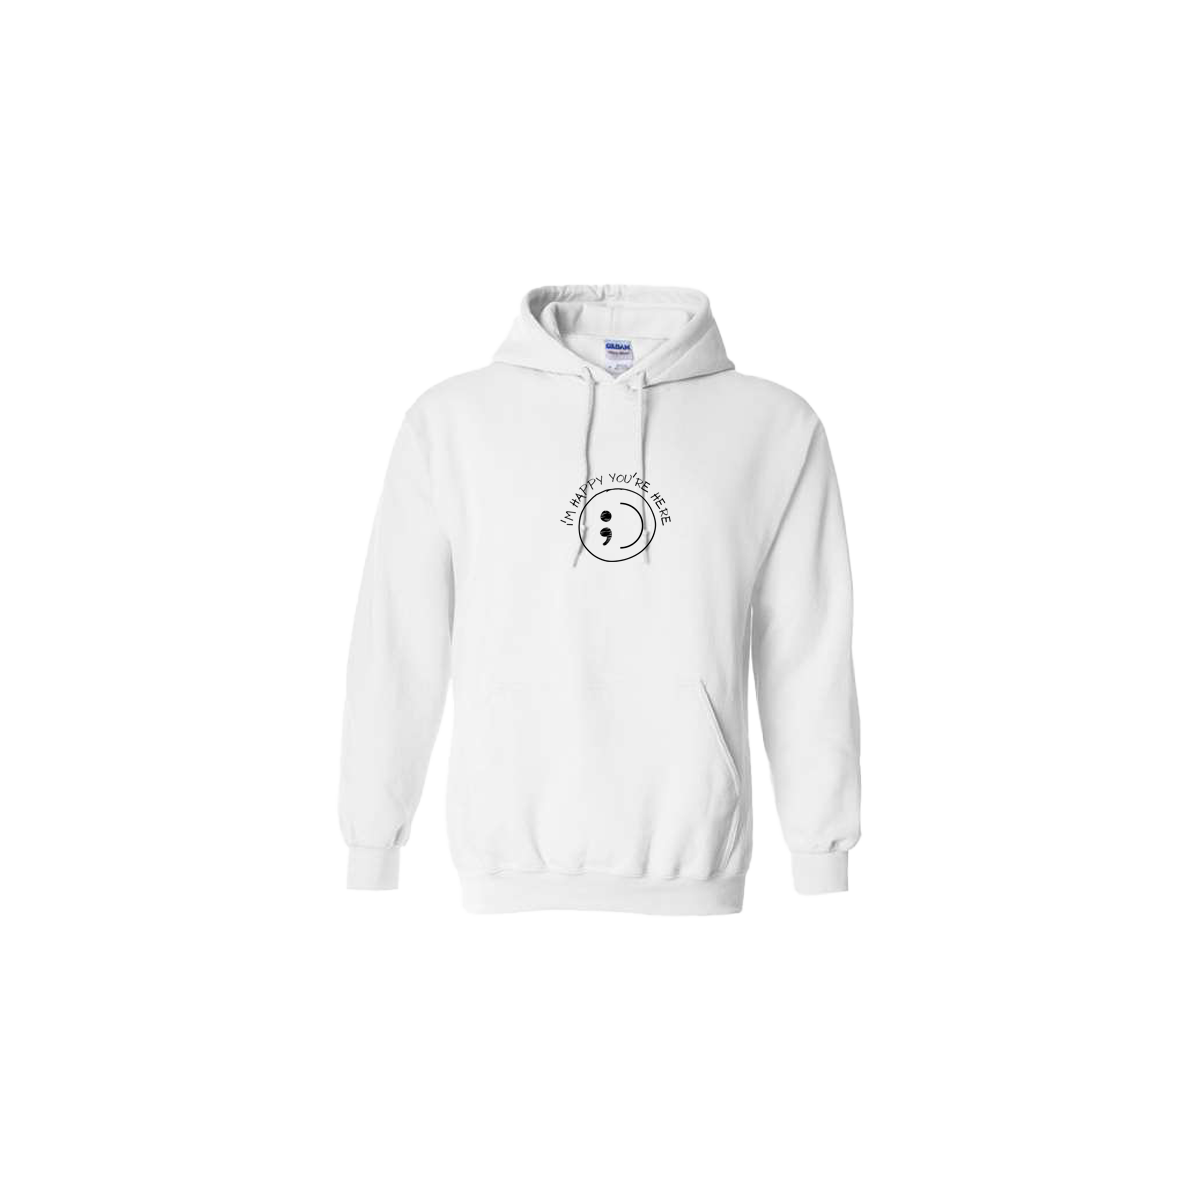 I'm Happy You're Here Embroidered White Hoodie - Mental Health Awareness Clothing